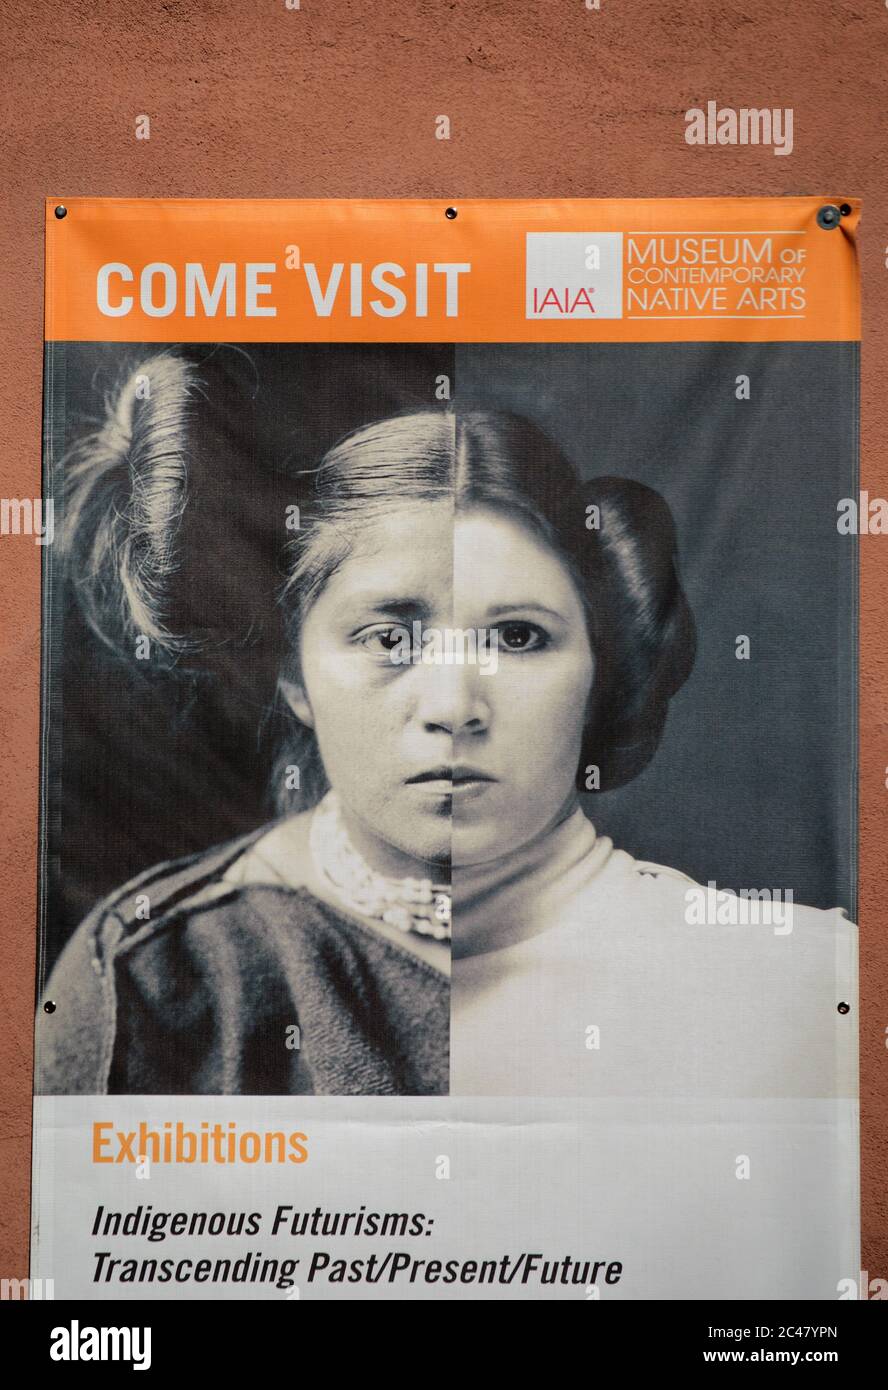 A mural hanging on the front of a Native-American art museum features a creative combination of photos of an historic Hopi girl and Princess Leia. Stock Photo